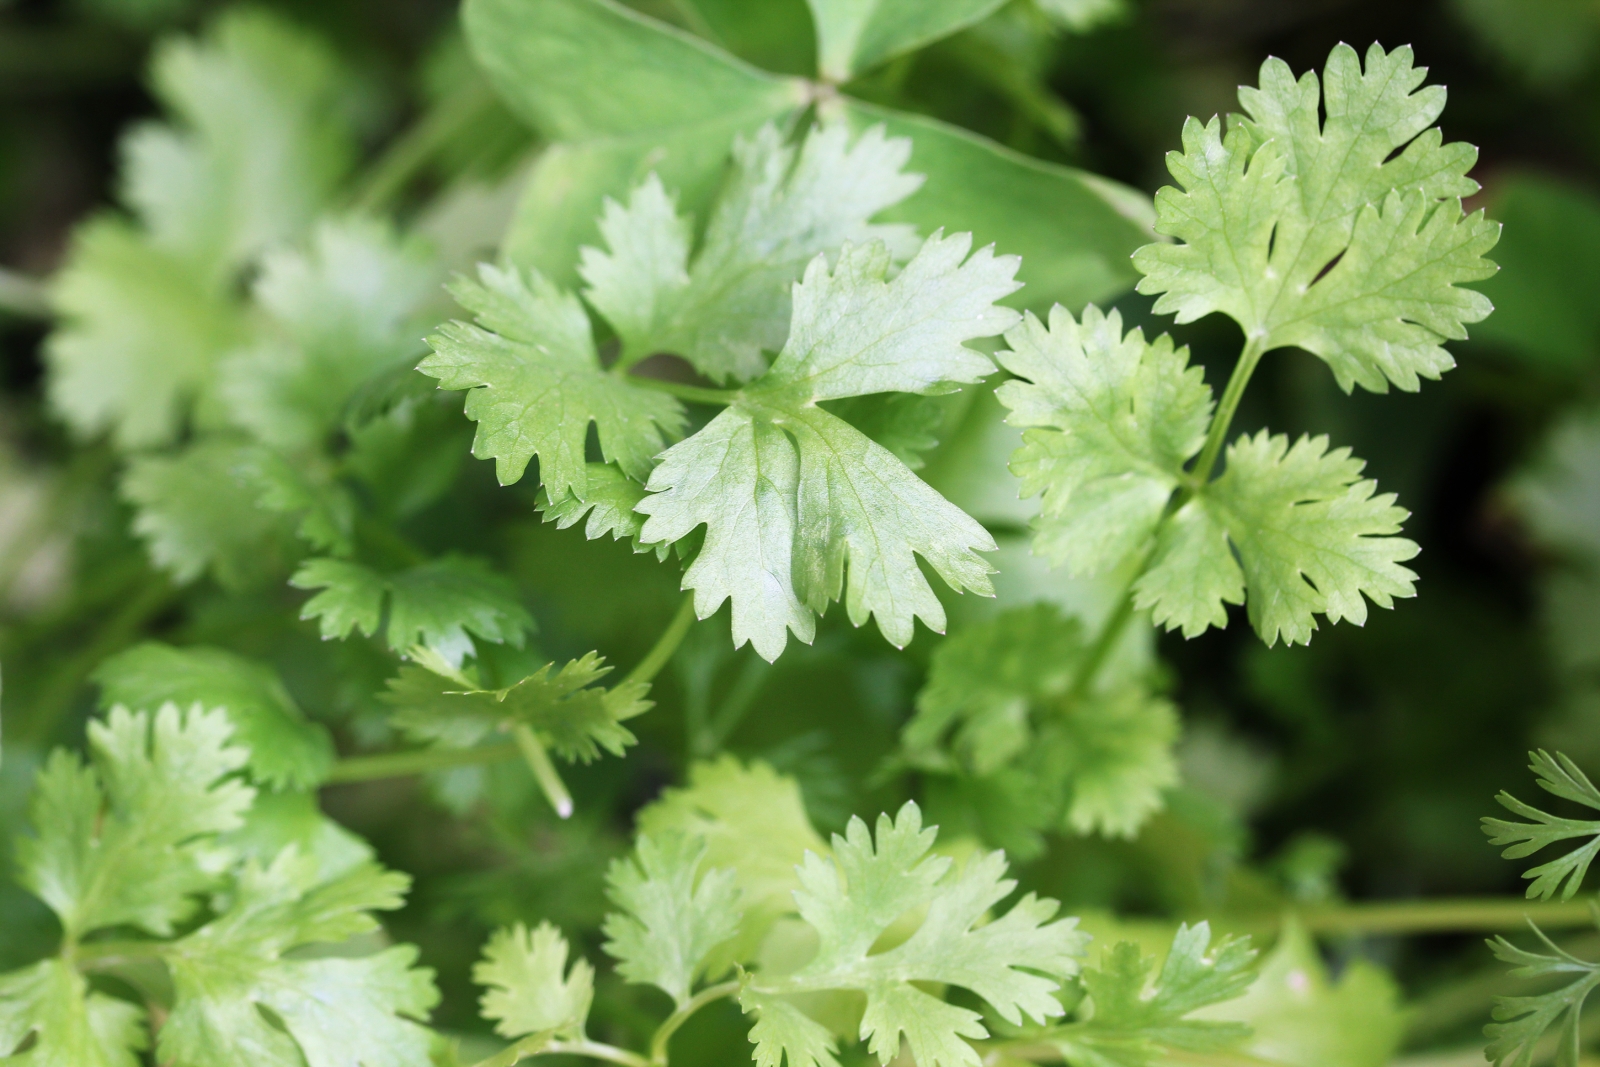 What S The Health Benefits Of Using Coriander Leaves Can It Be